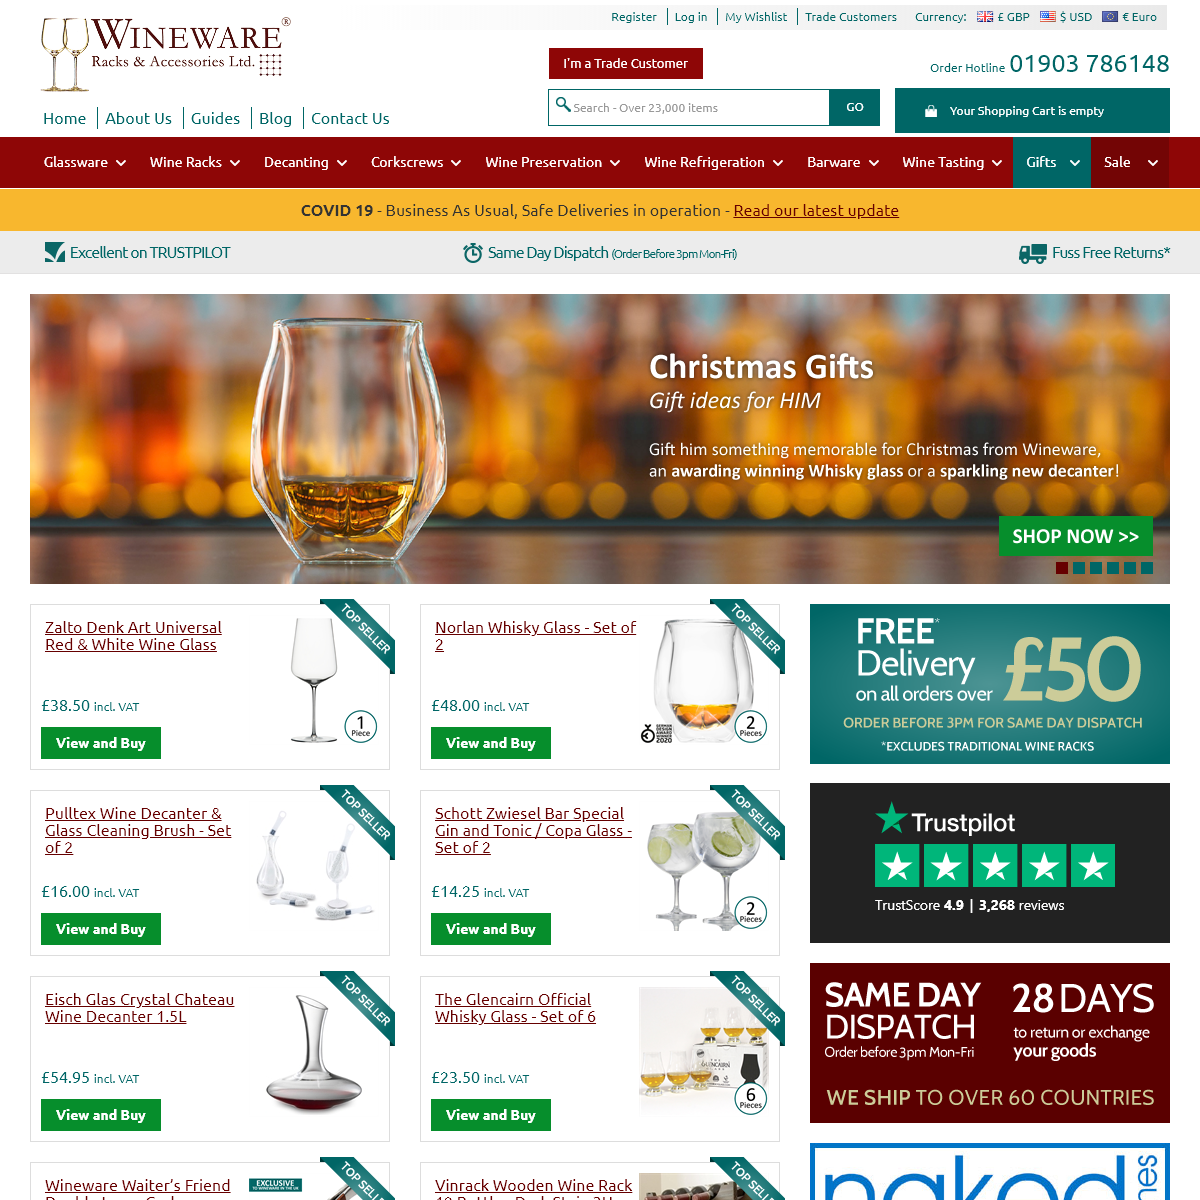 A complete backup of wineware.co.uk